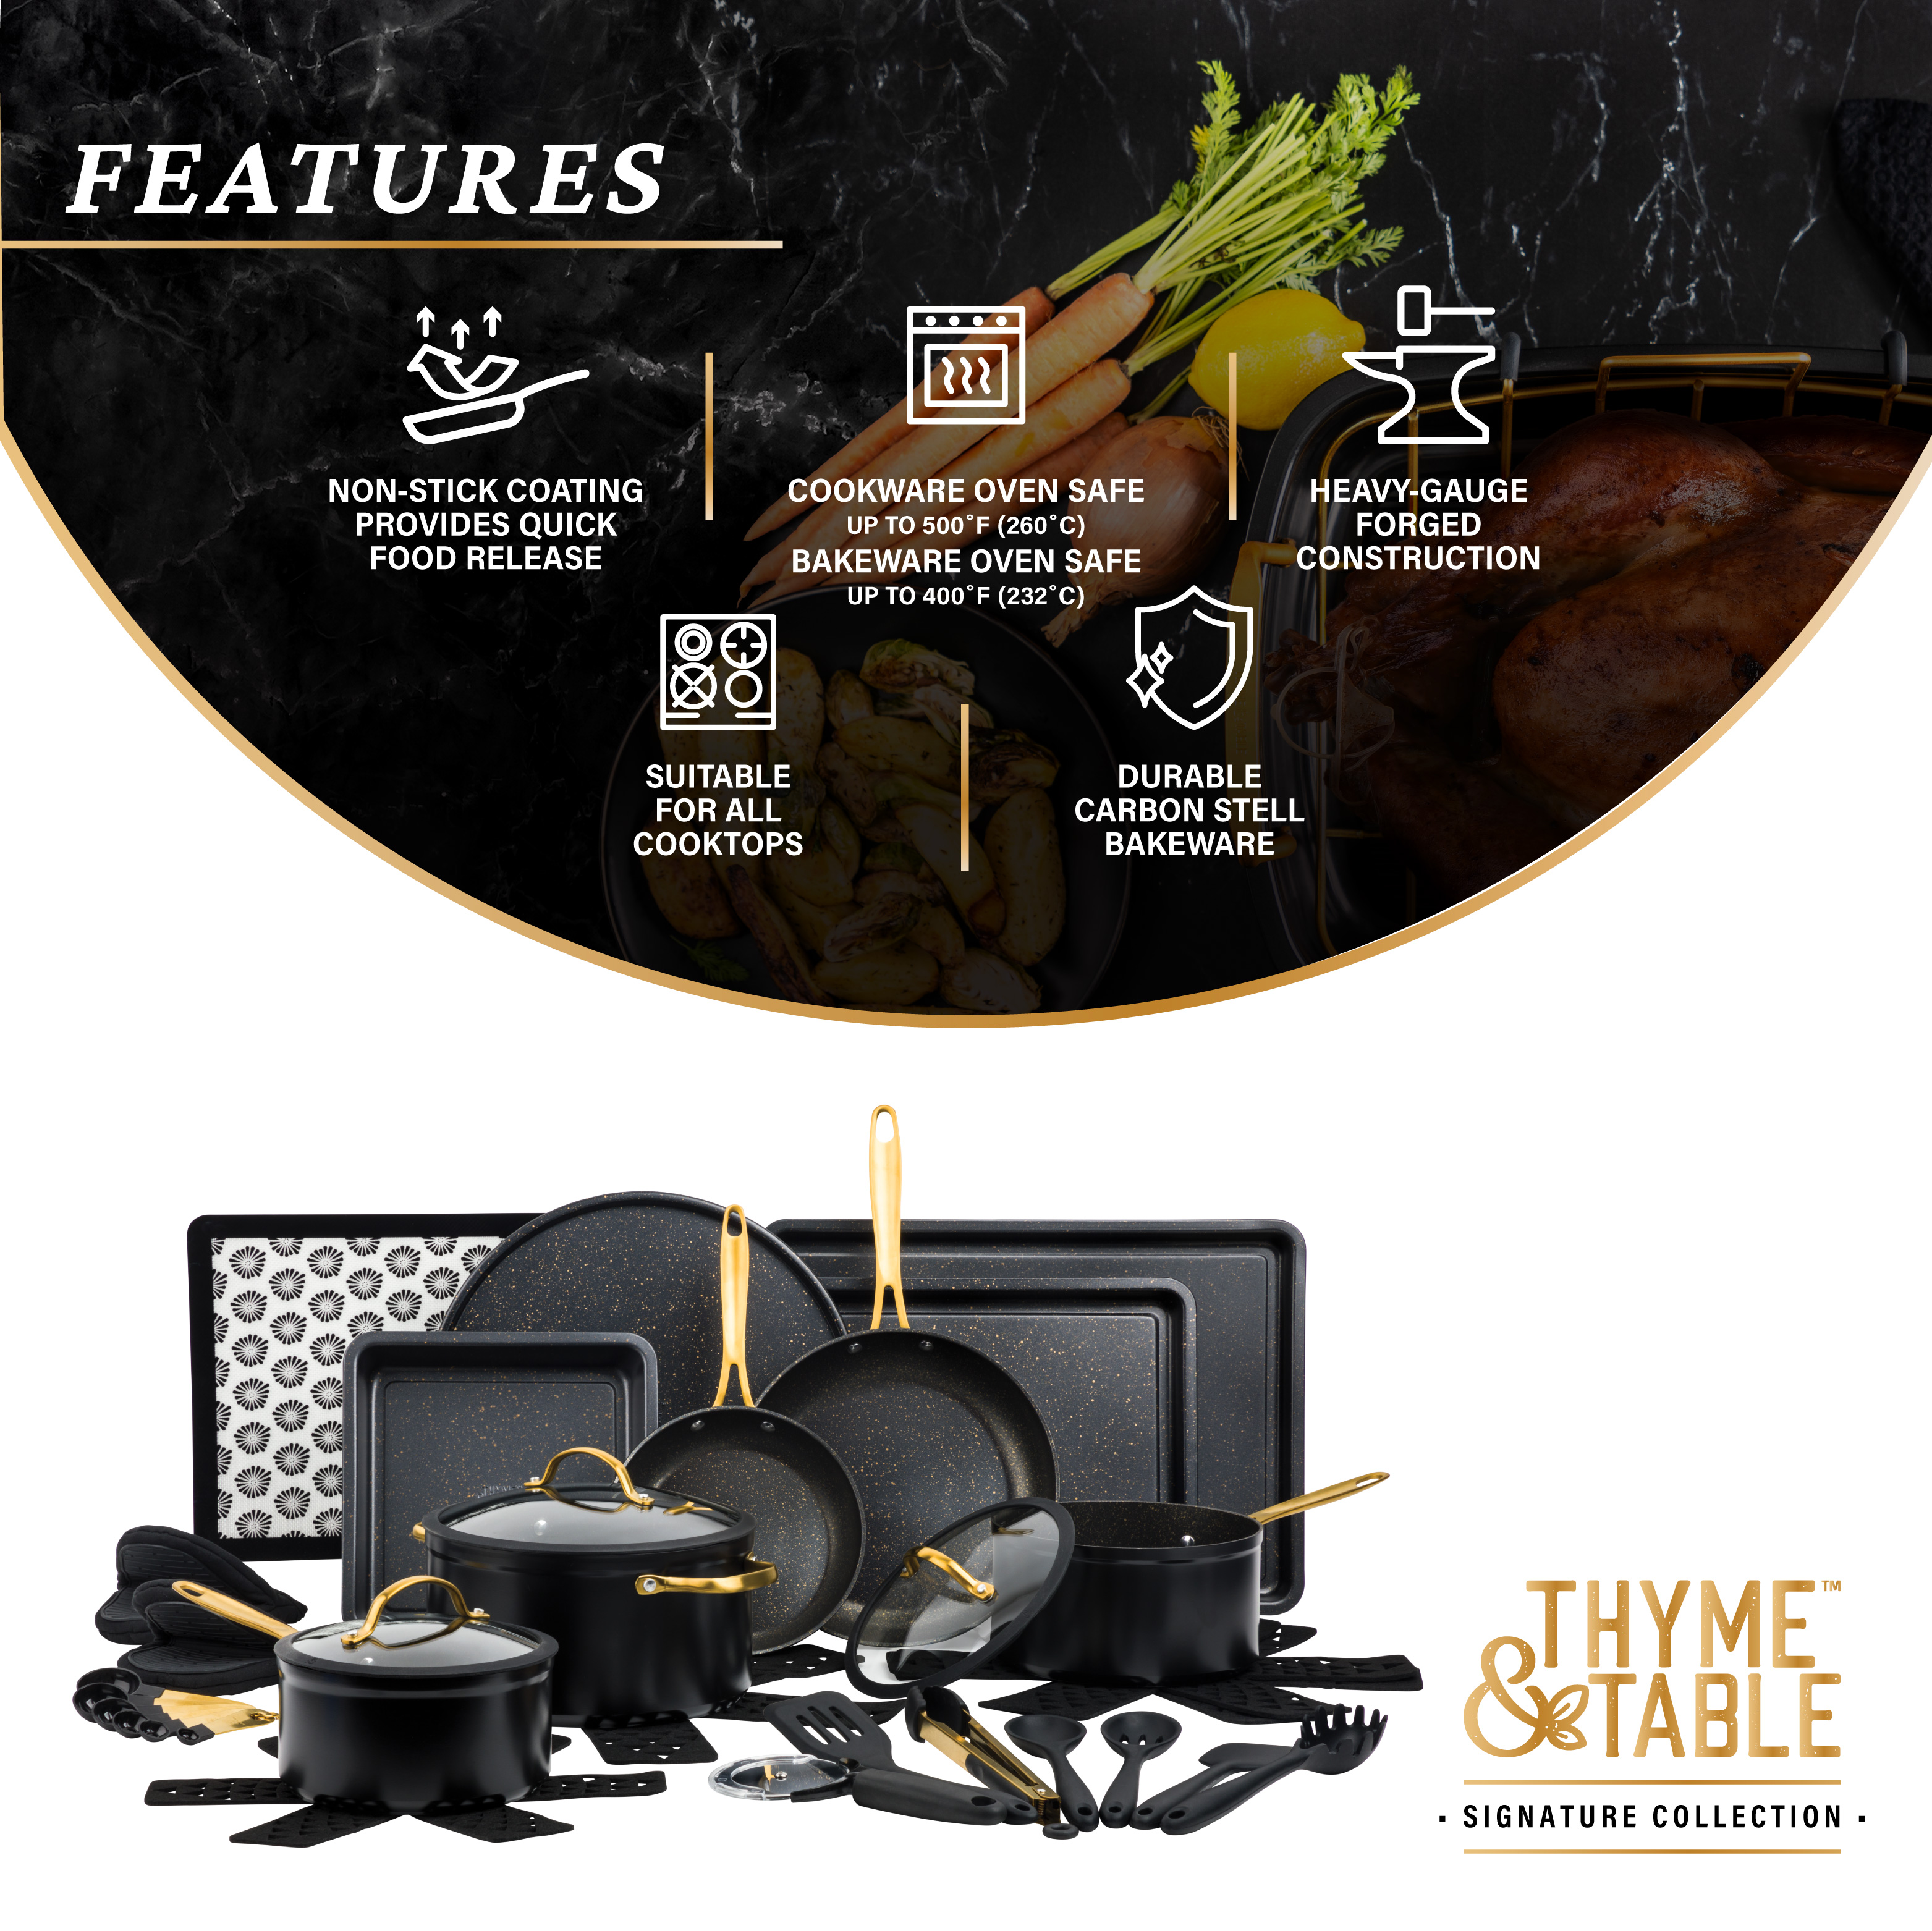 Thyme & Table 32-Piece Cookware & Bakeware Non-Stick Set, Black - image 4 of 6